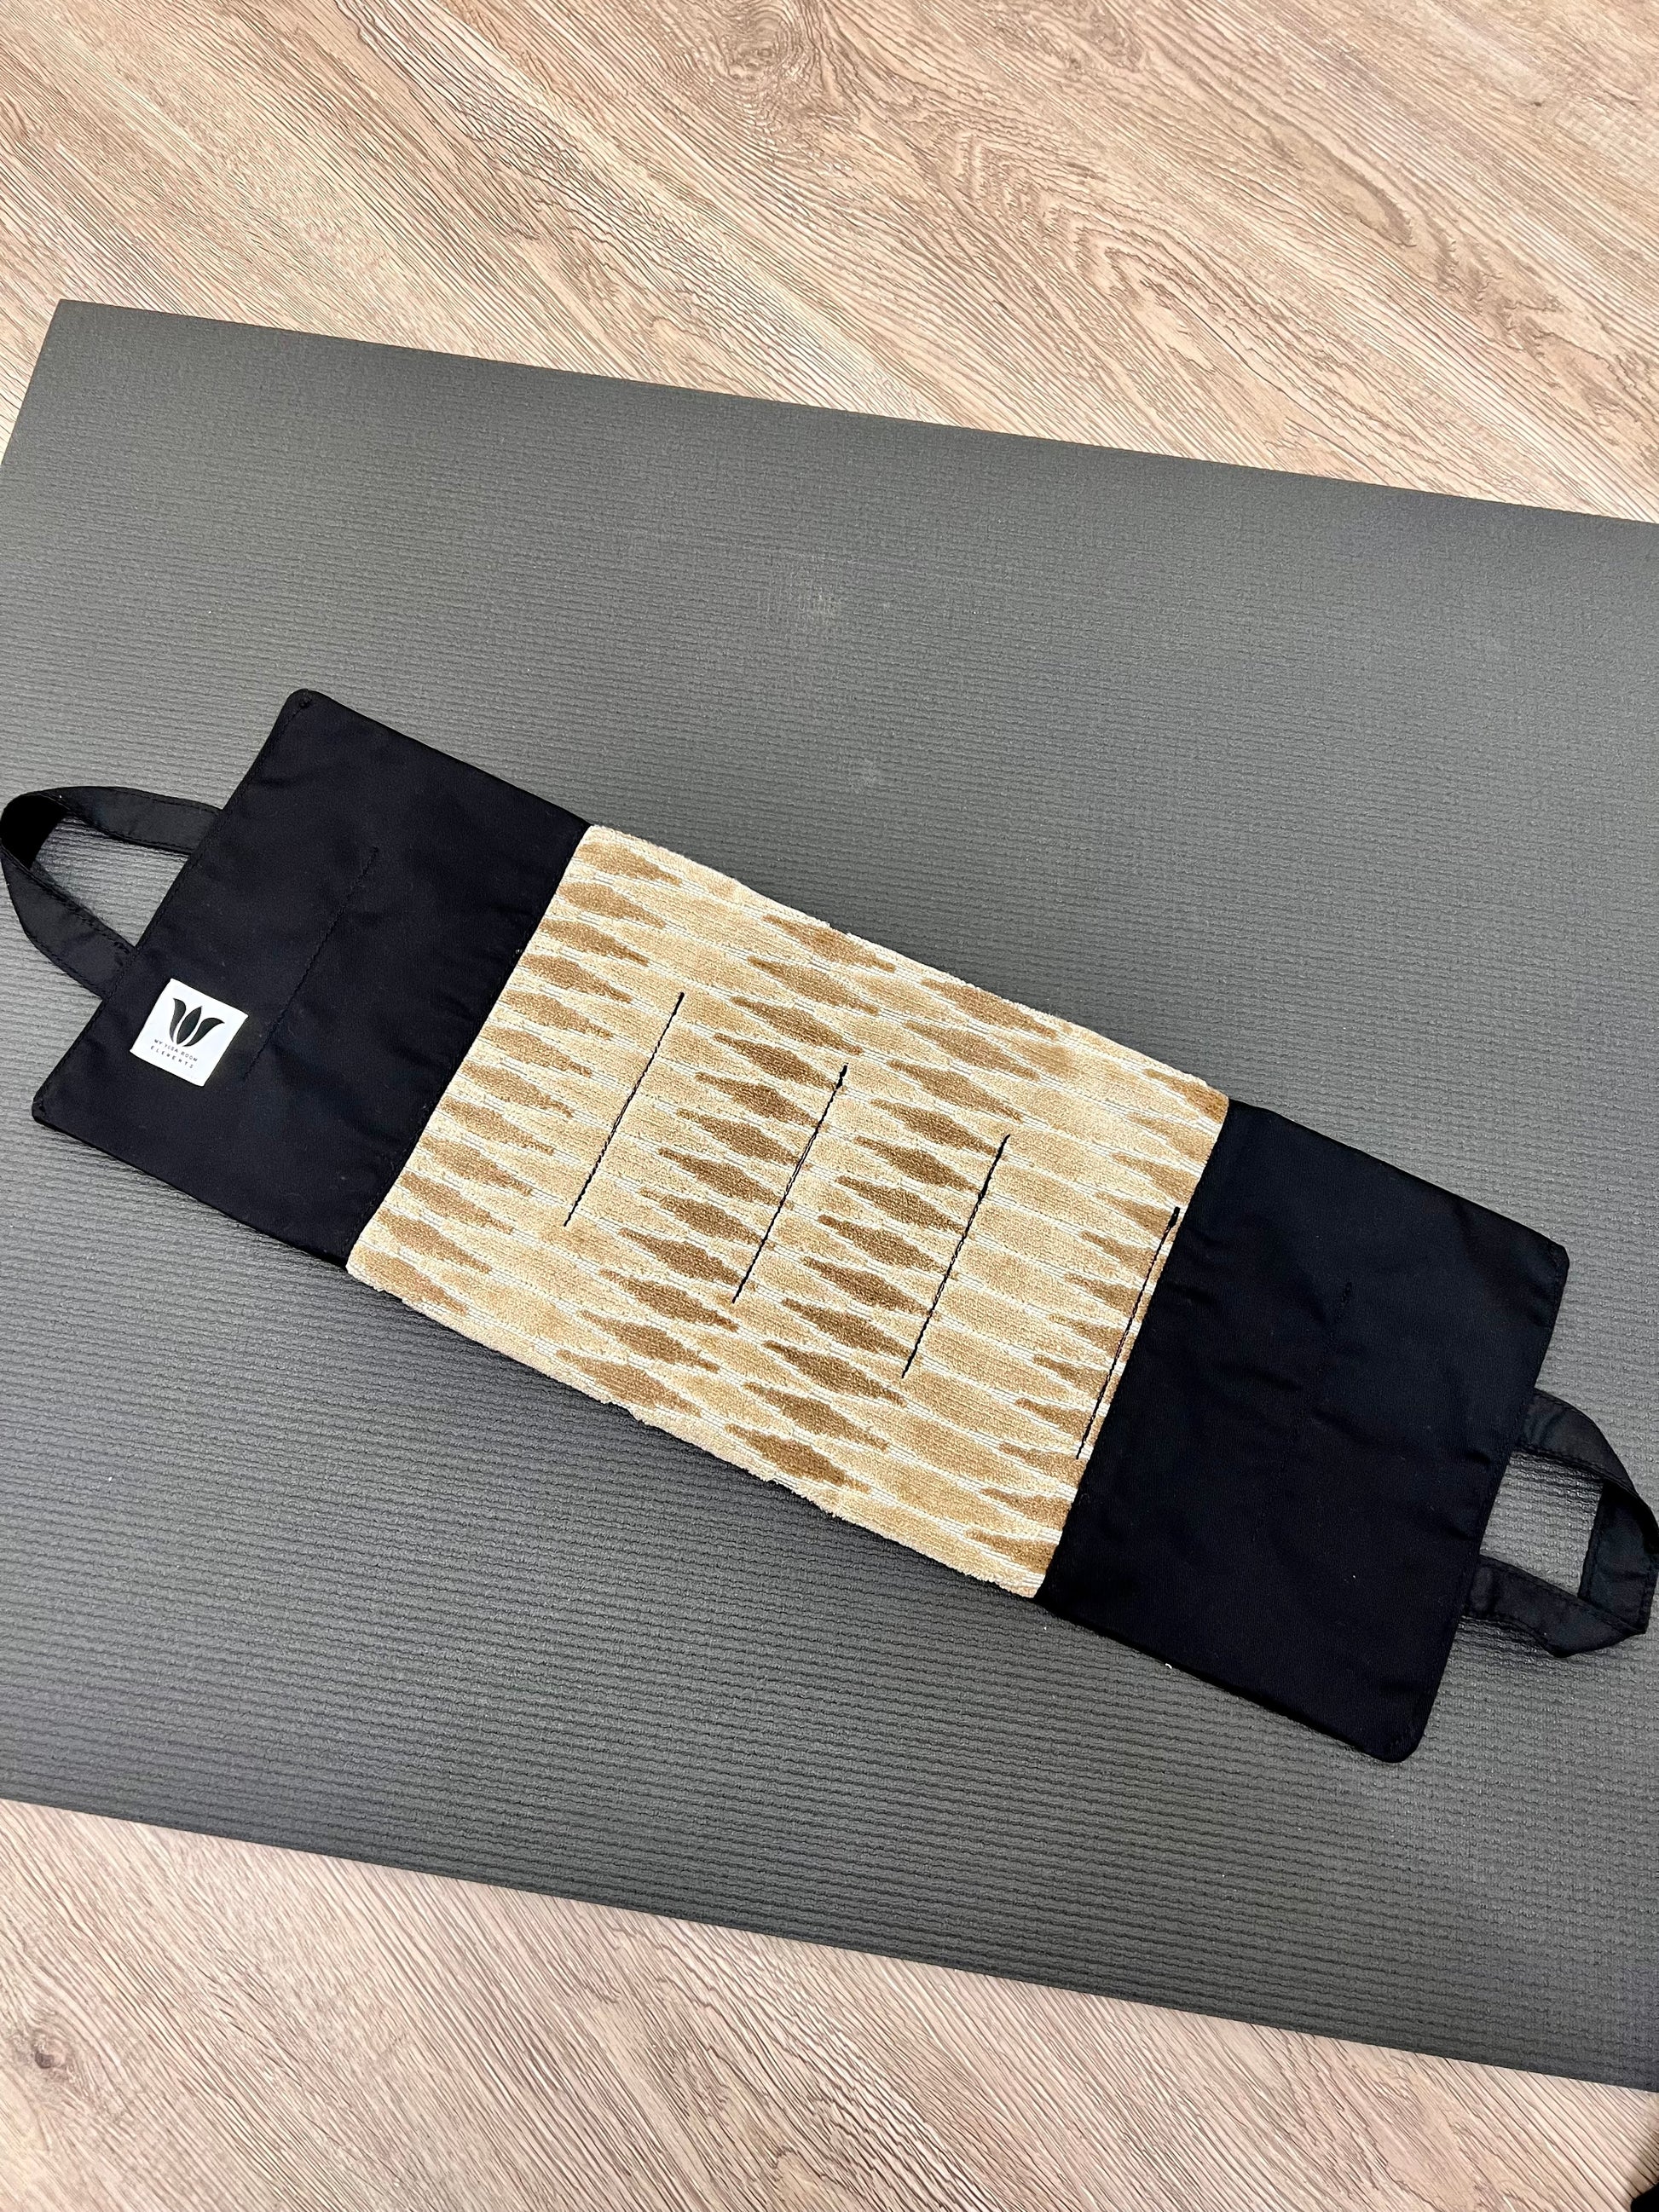 Yoga Sandbag version by My Yoga Room Elements. Add grounding to your practice with this heatable yoga prop. Handcrafted in Calgary in plush diamond print fabric.